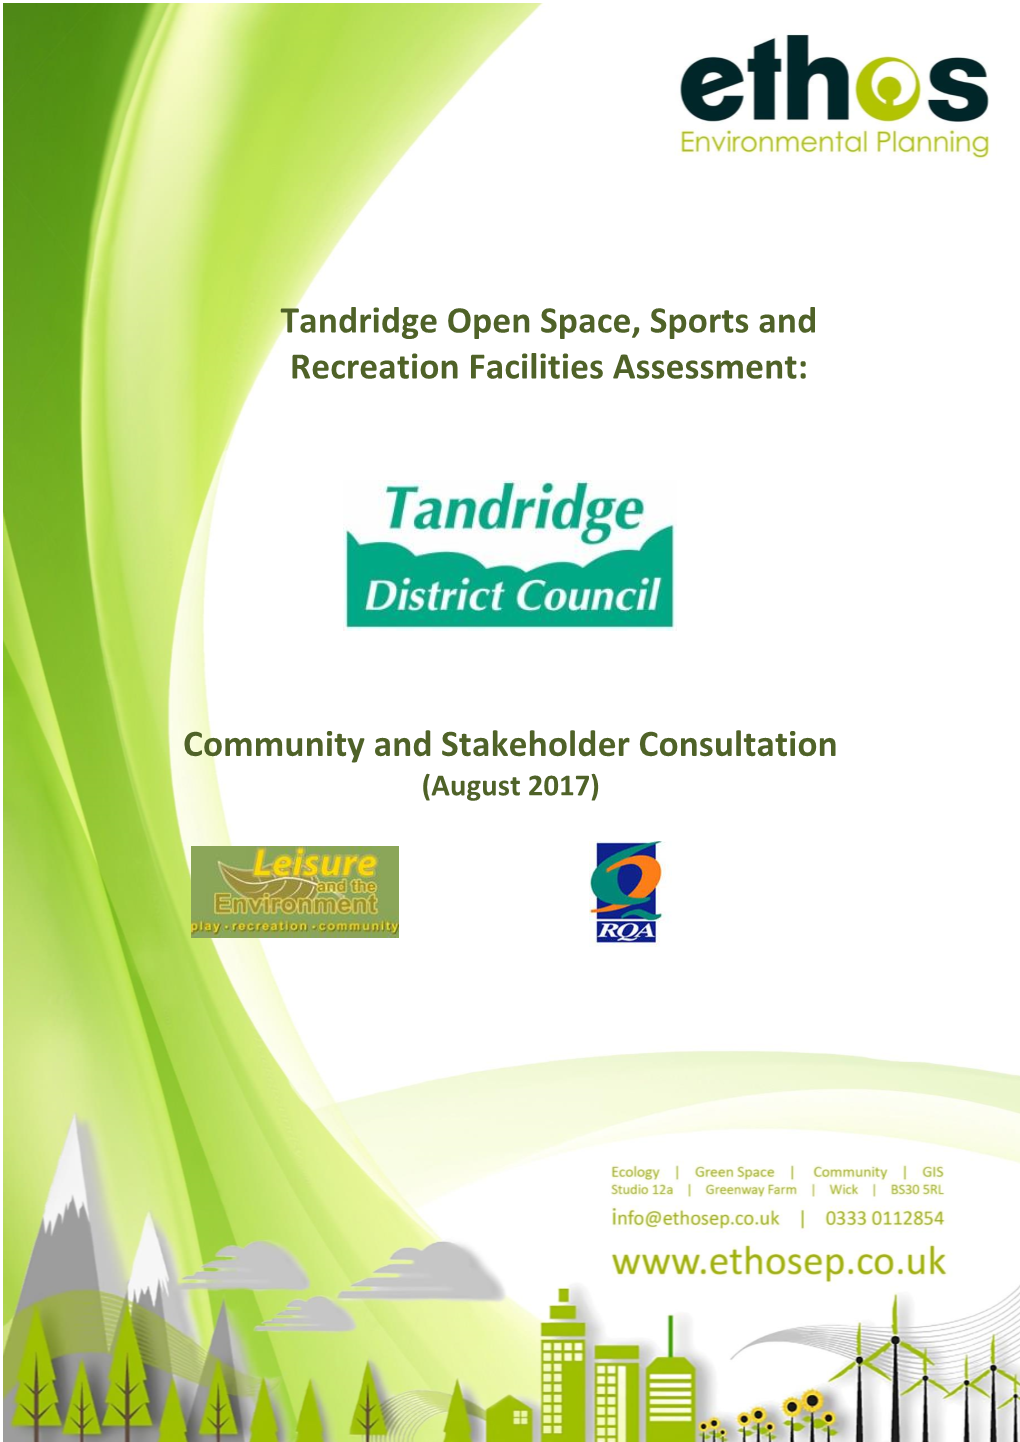 Tandridge Open Space, Sports and Recreation Facilities Assessment: Community and Stakeholder Consultation